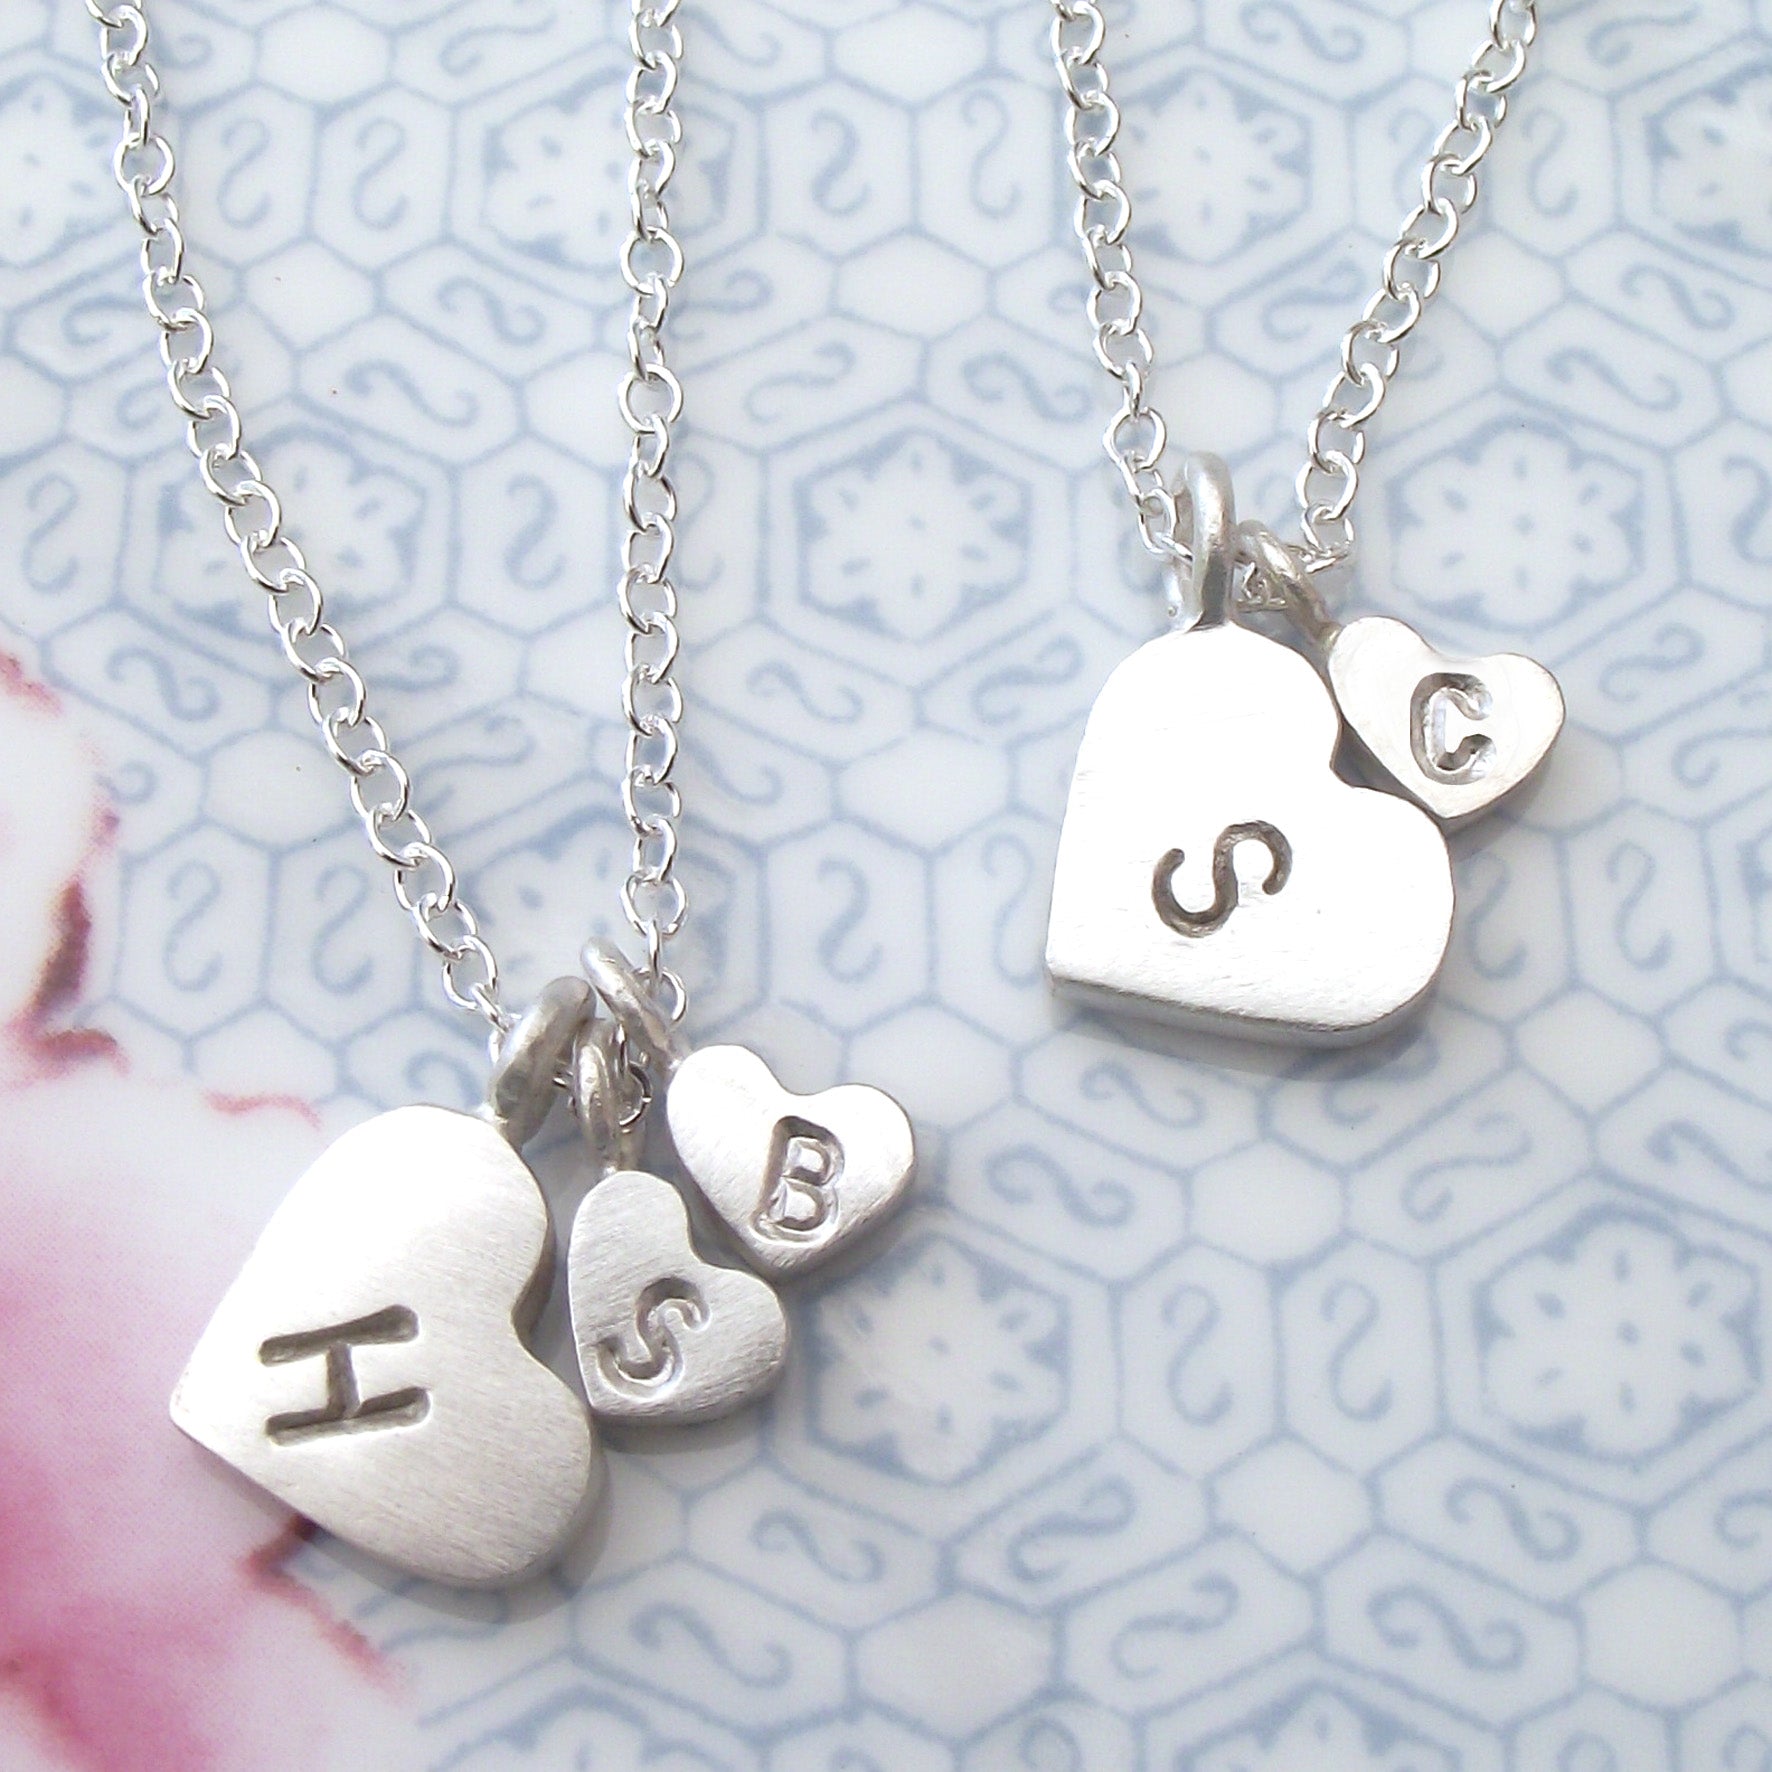 Buy Kids Initial Necklace, Mothers Necklace Initials,mom Gift, Initial  Jewelry, Family Necklace for Mother, Personalized Custom Jewelry Online in  India - Etsy